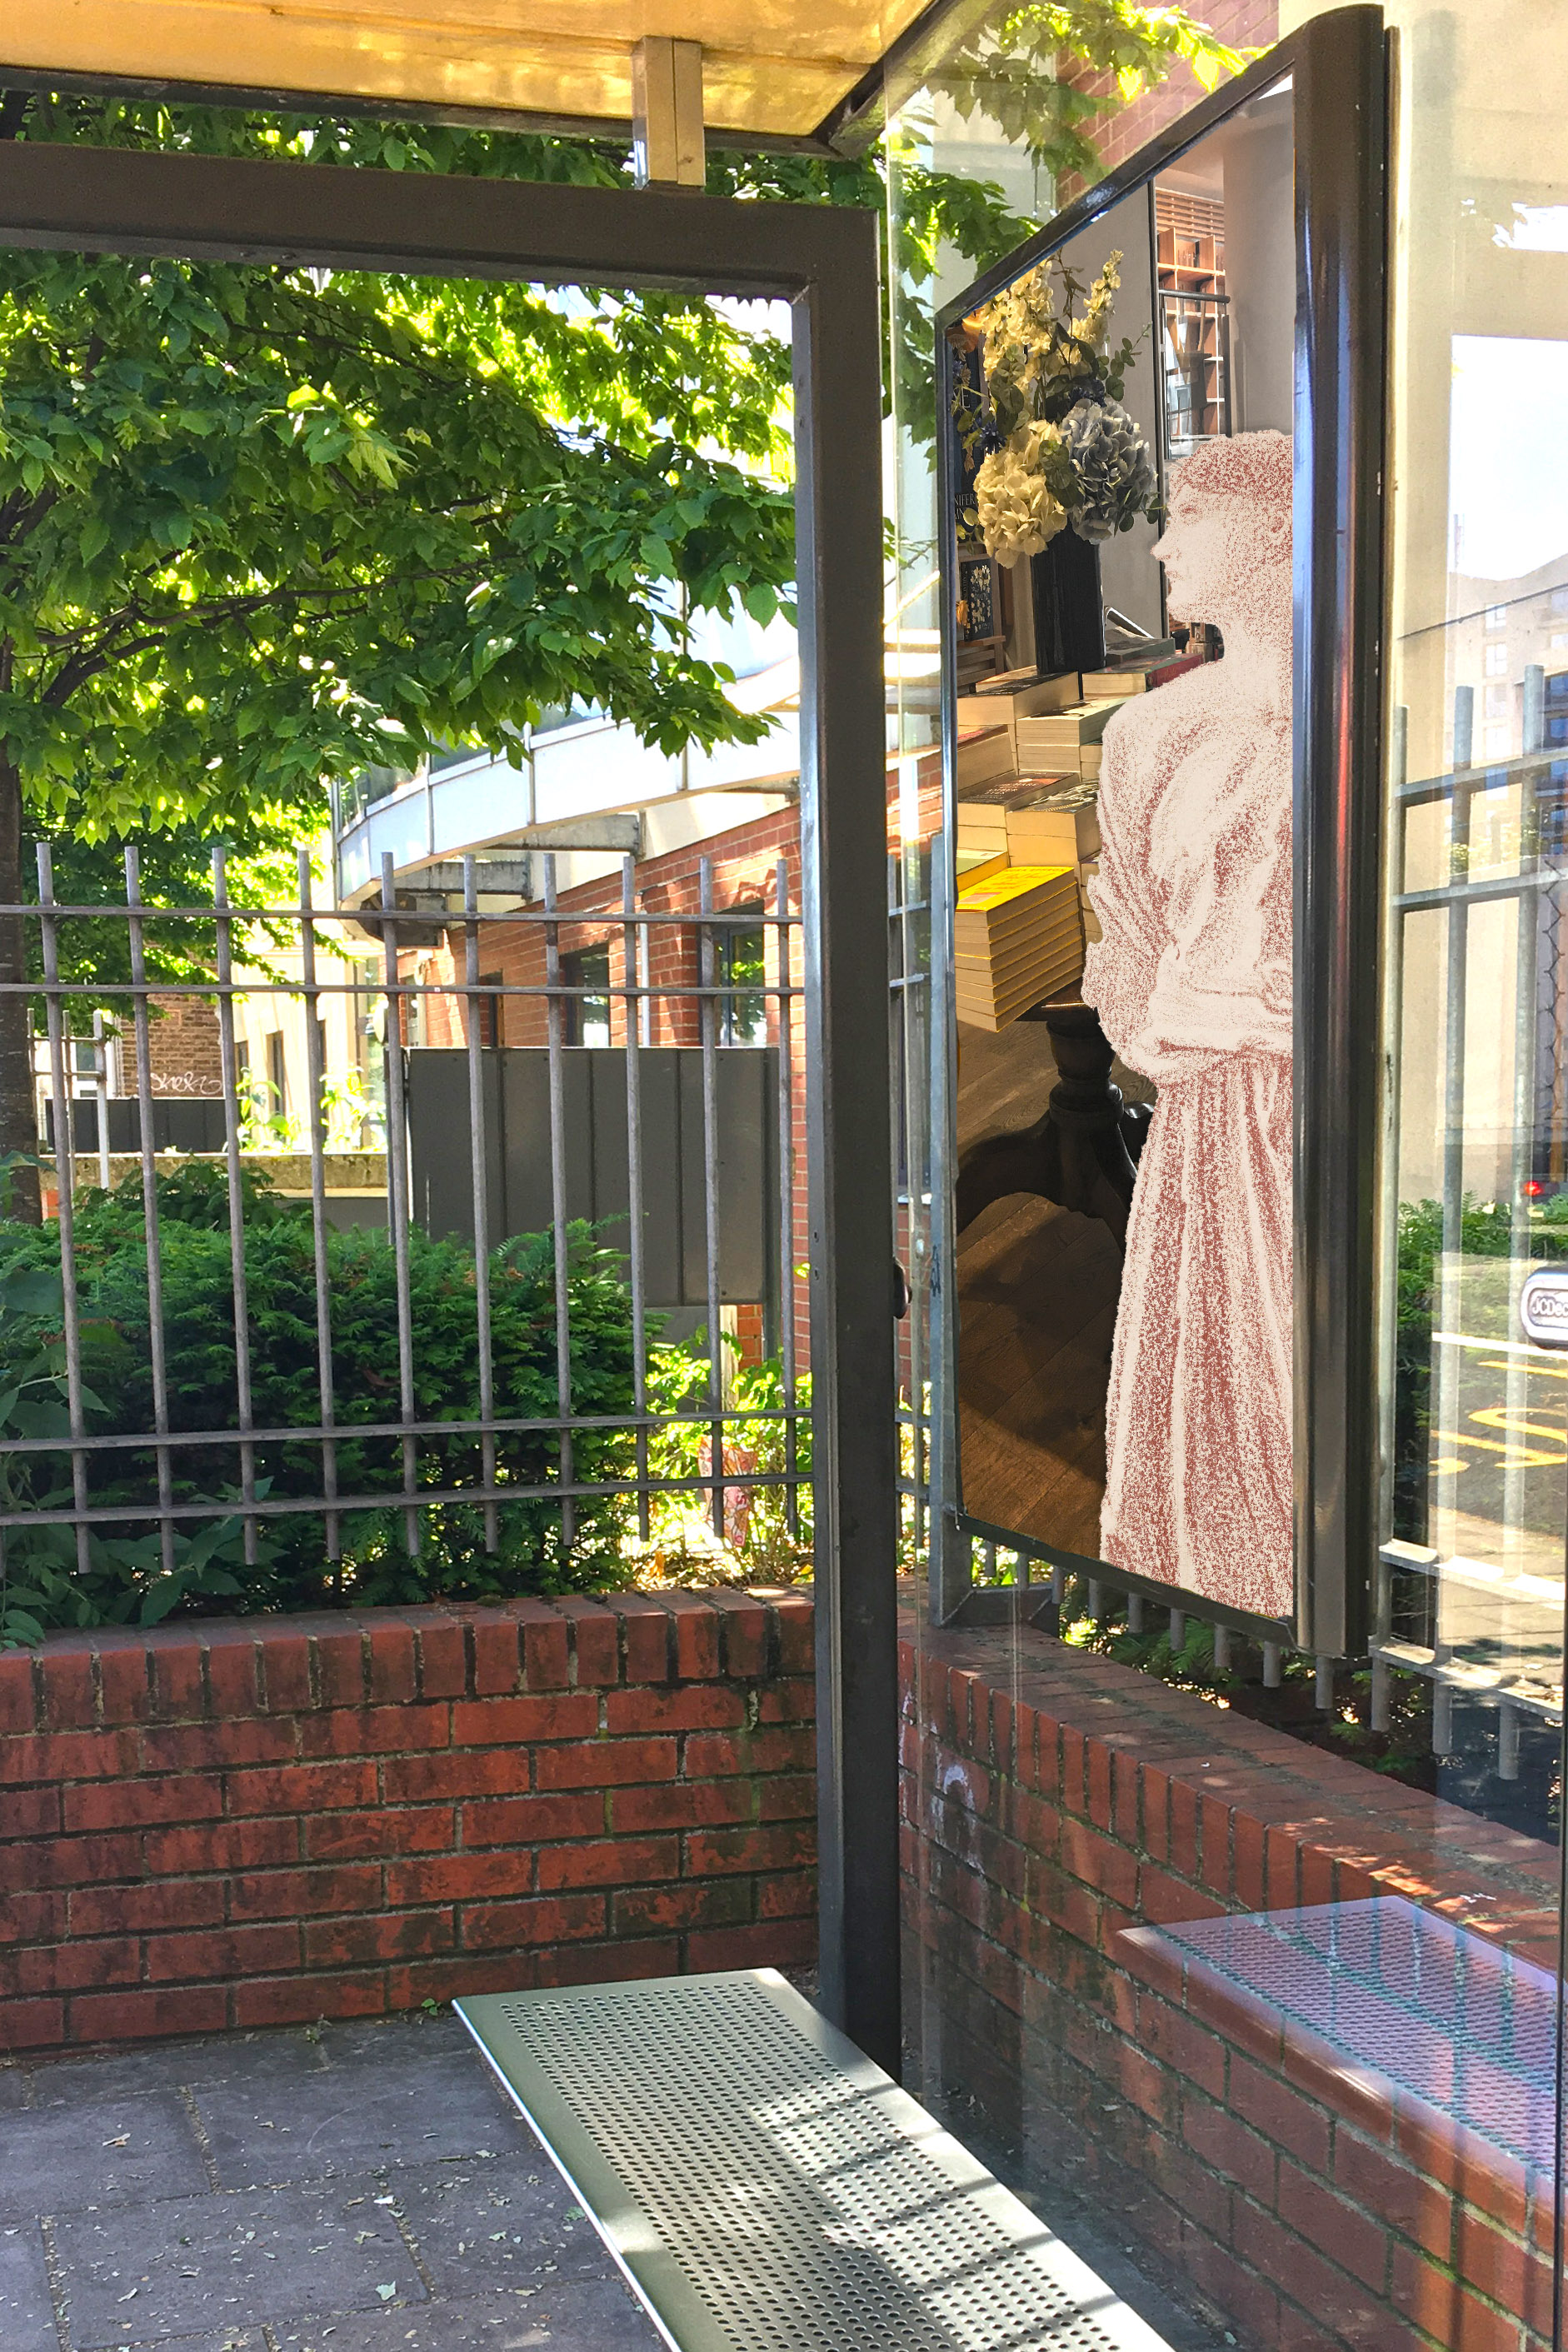 Edward Burne-Jones's "The Mirror of Venus – Study of Kneeling Female Attendant" (1865–66) next to a table of books at the Piccadilly Waterstones on the side of a bus shelter on Evelyn Street in Deptford